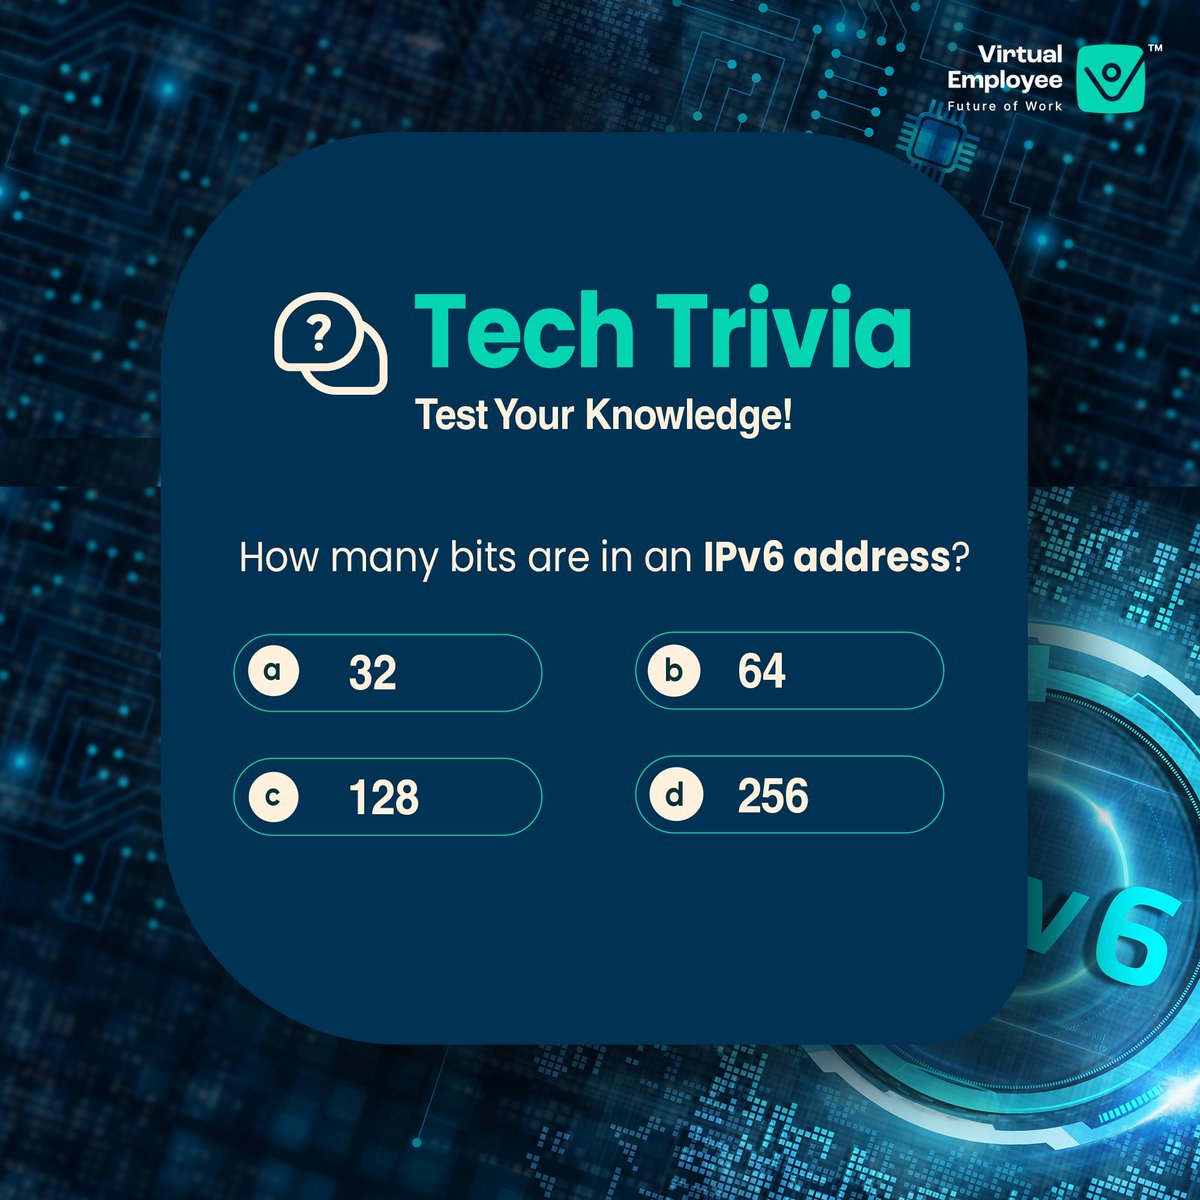 Ready to put your tech skills to the test? 
Join us for Tech Trivia Time and drop your answers in the comments below! 
The most impressive responses could snag a shoutout!

#VirtualEmployee #techtrivia #techcontest #condingcontest #coderstar #softwaredevelopmentservices